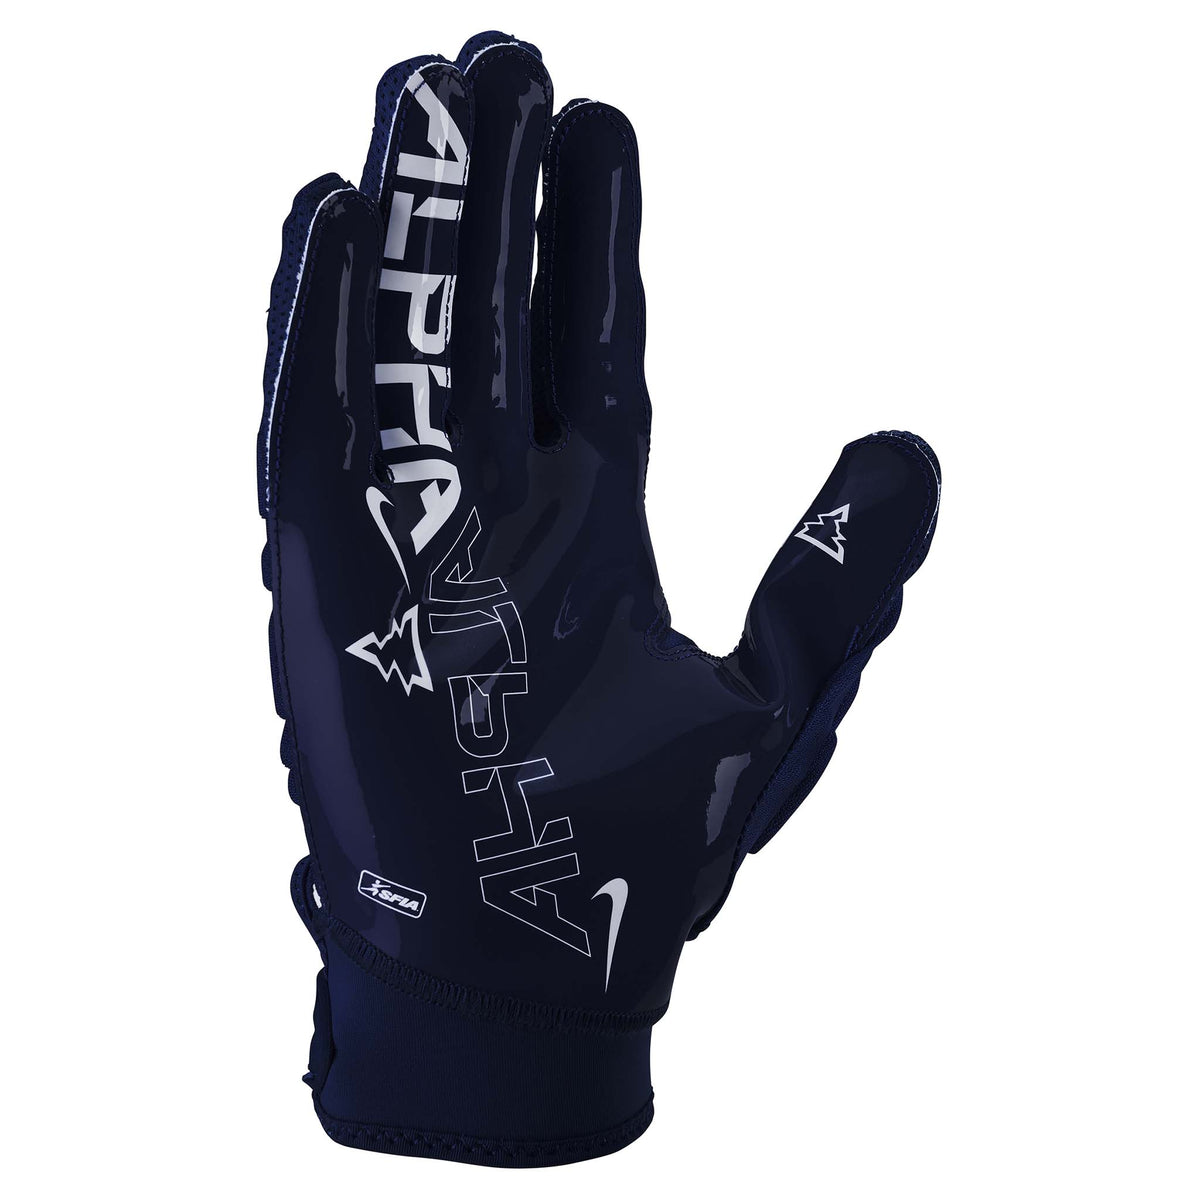 Nike Superbad 6.0 gants de football americain pour adultes midnight navy paume